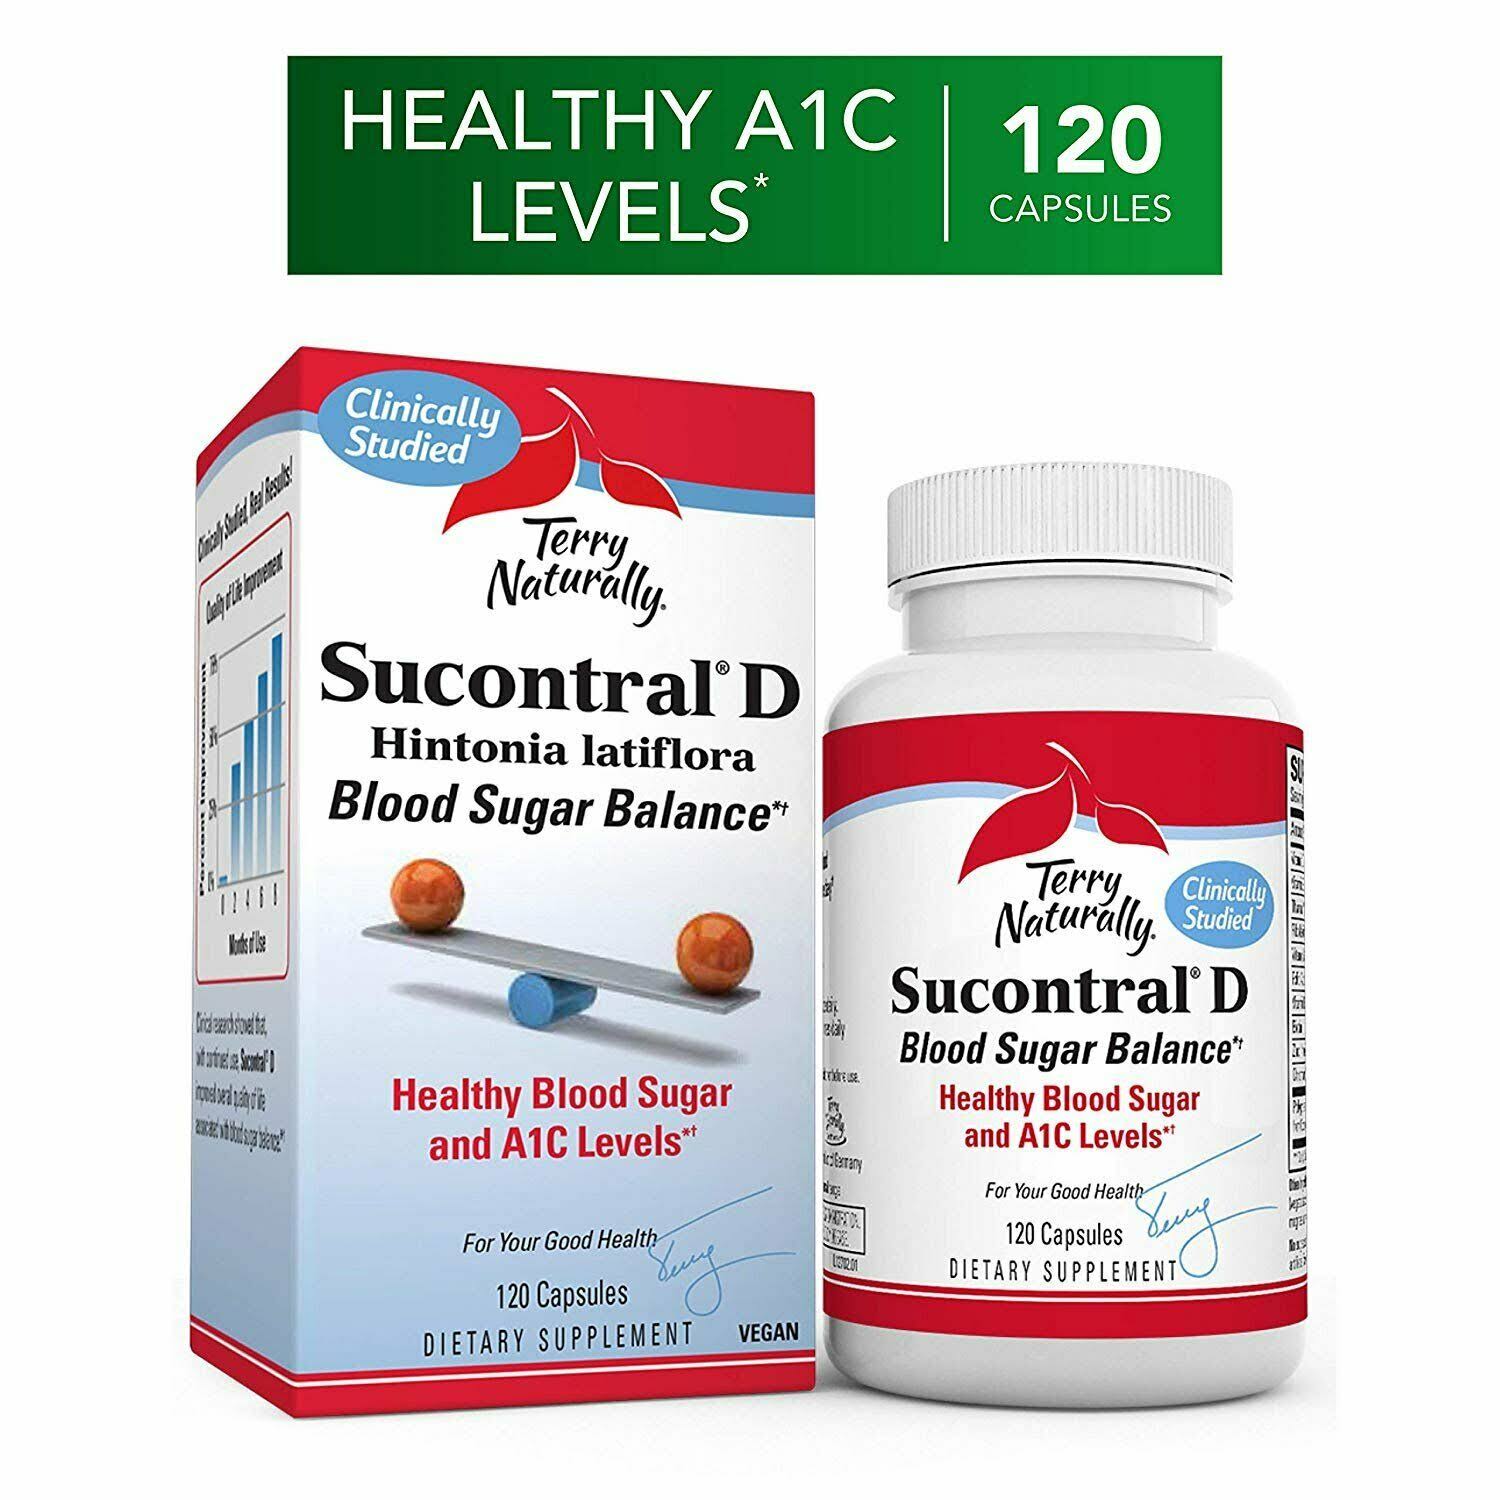 Terry Naturally Sucontral D Blood Sugar Balance - 120 Capsules